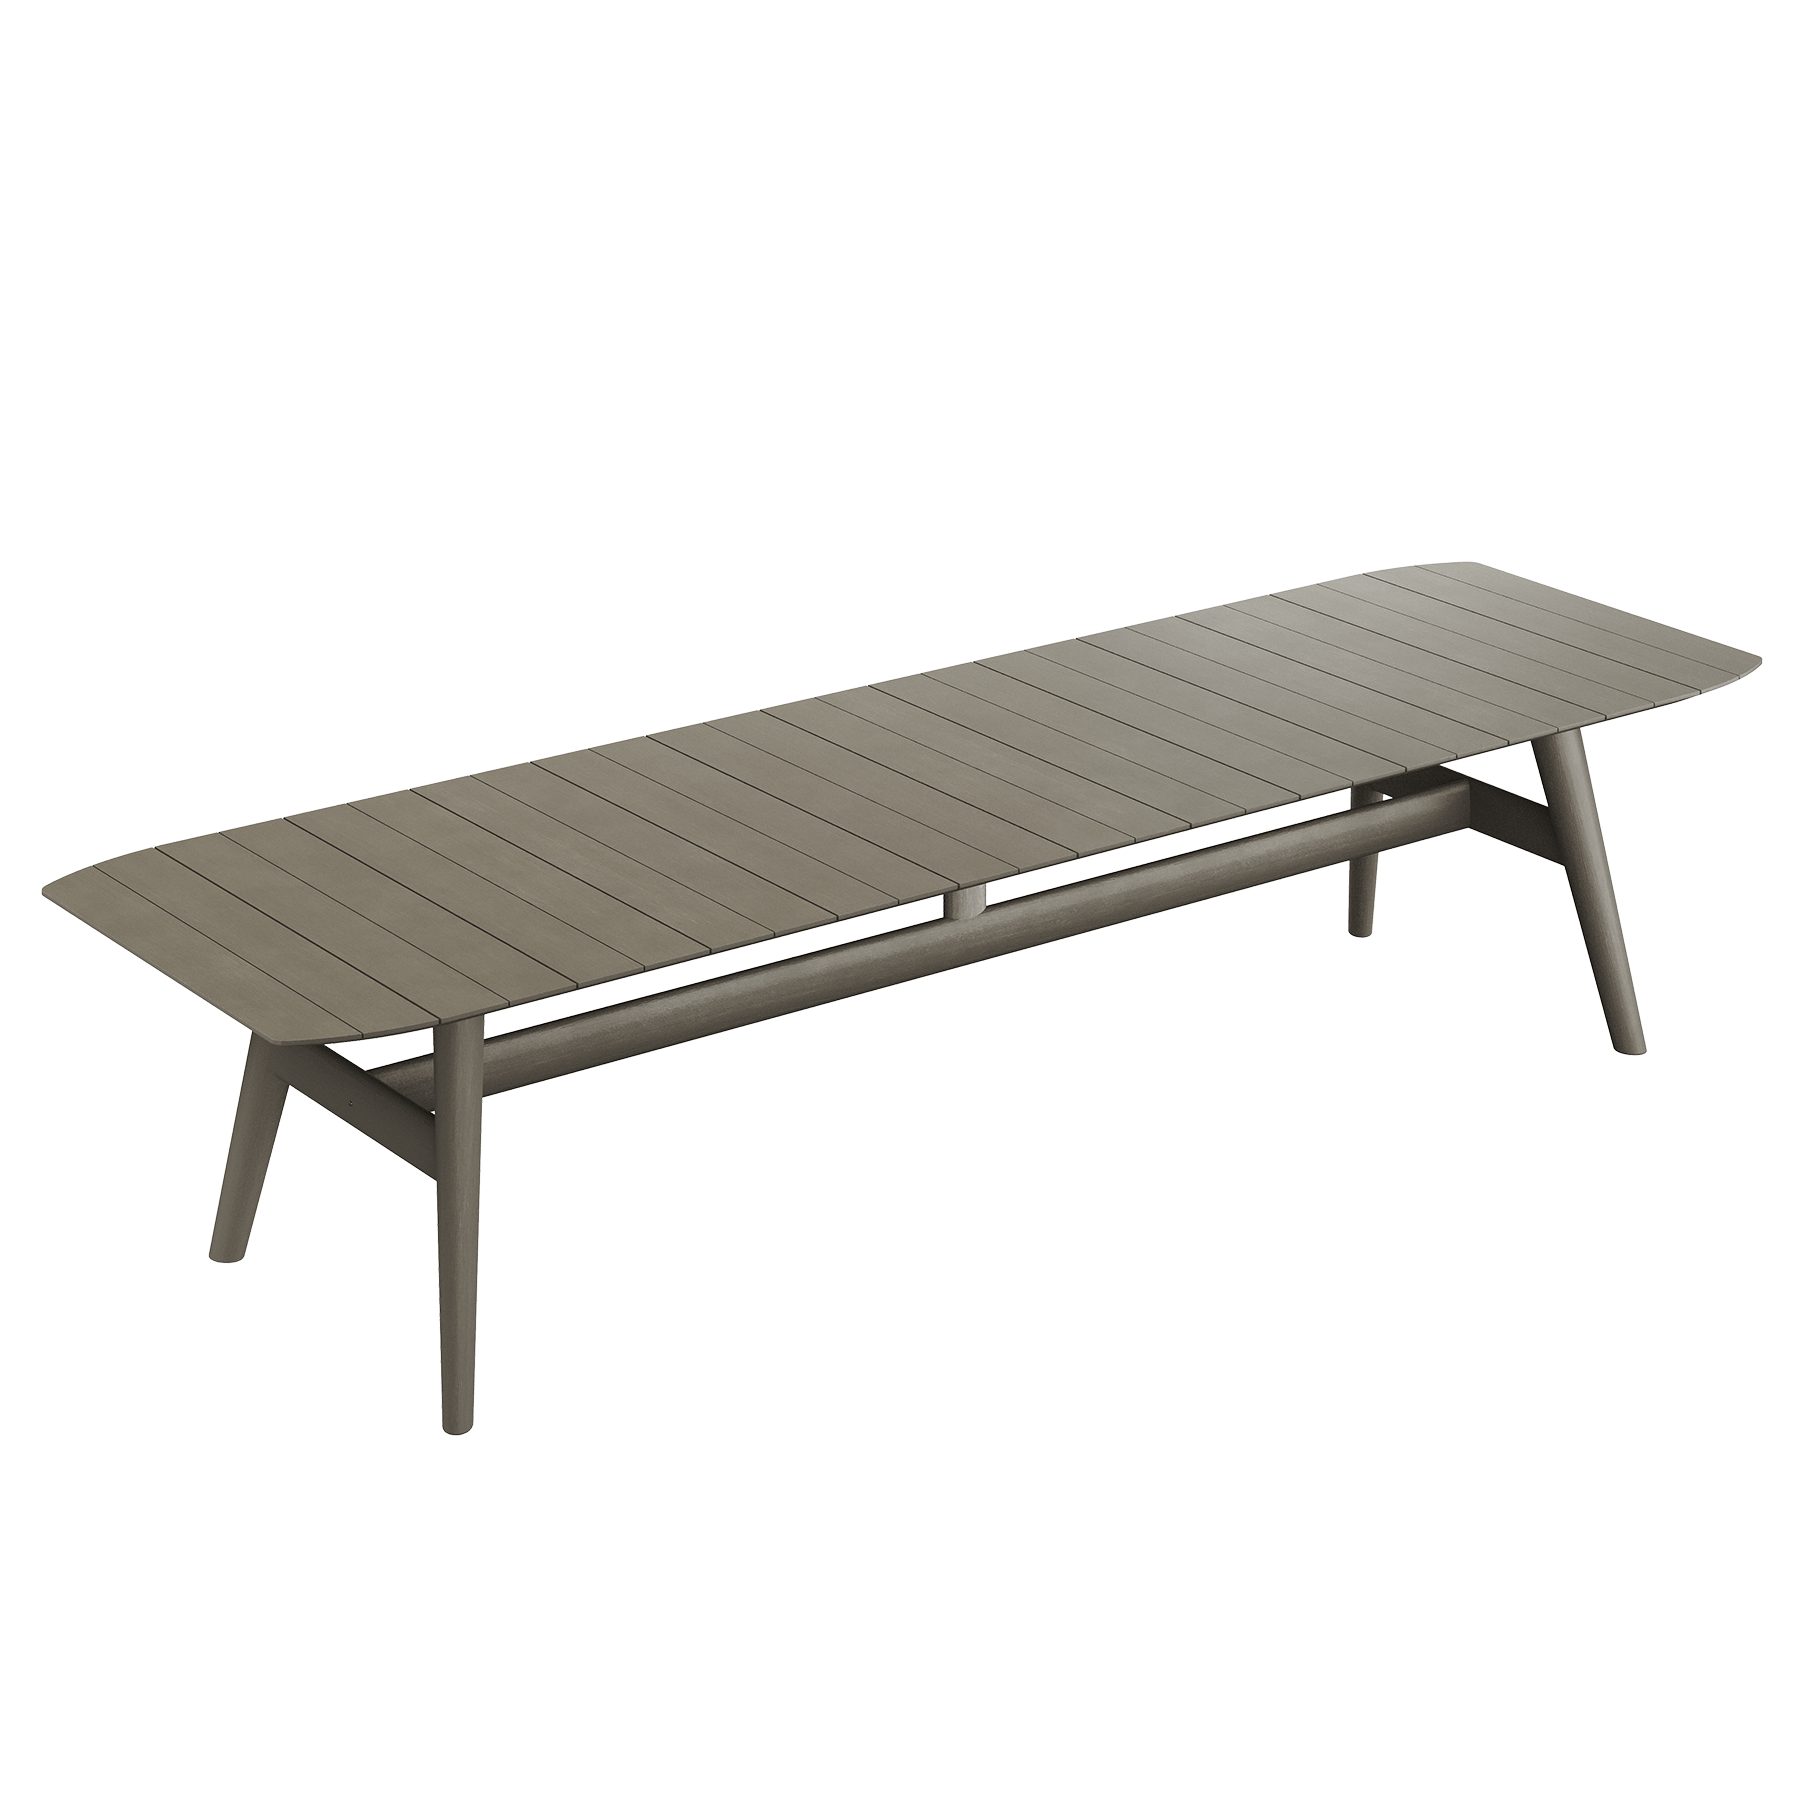 N1 Custom Fit Furniture Cover - Dining Table